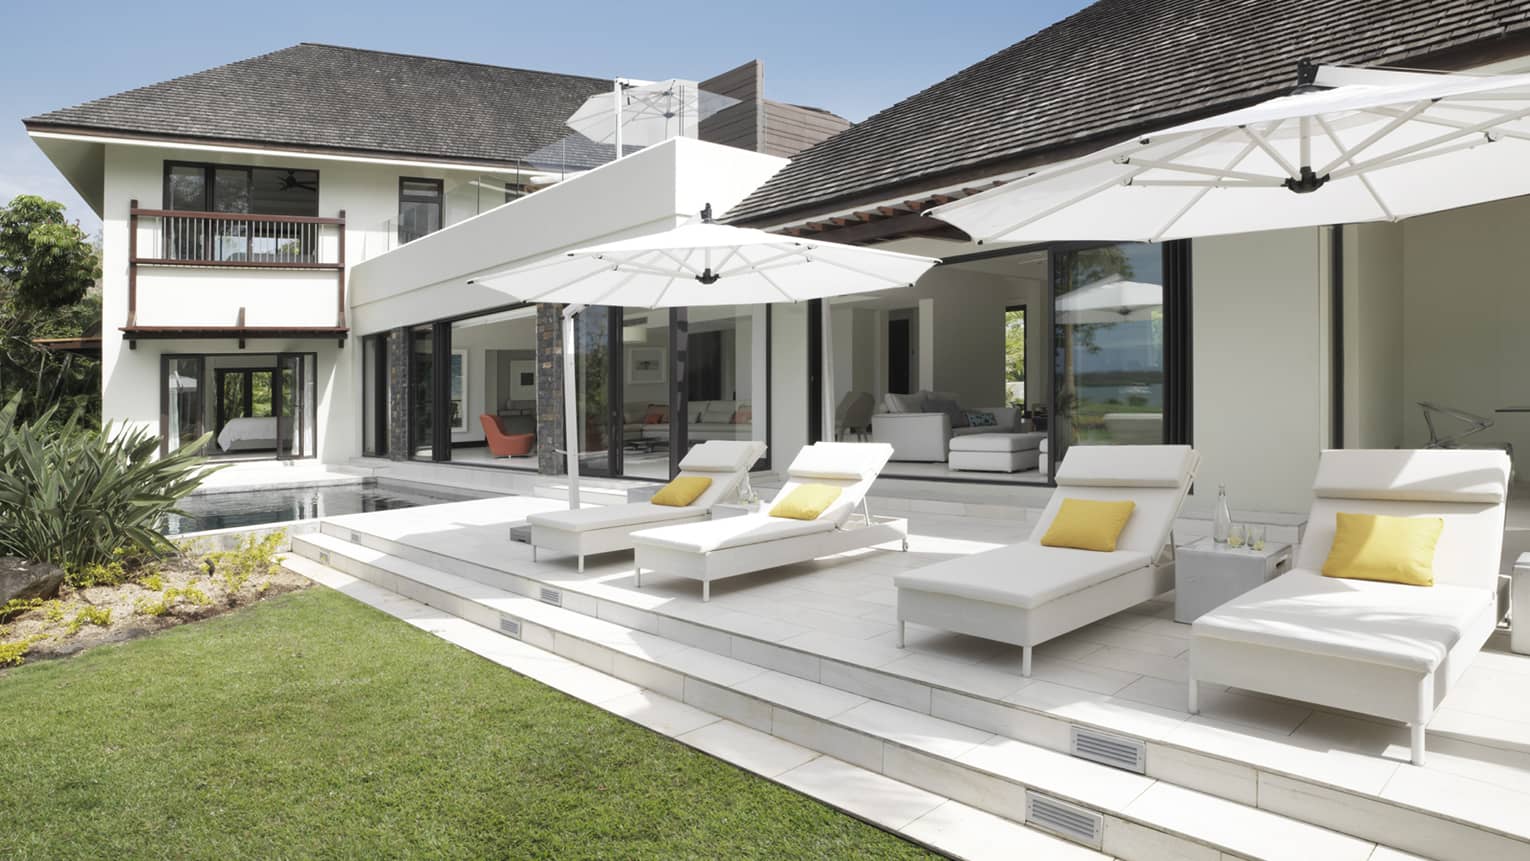 White lounge chairs under umbrellas on patio in front of large white two-storey villa